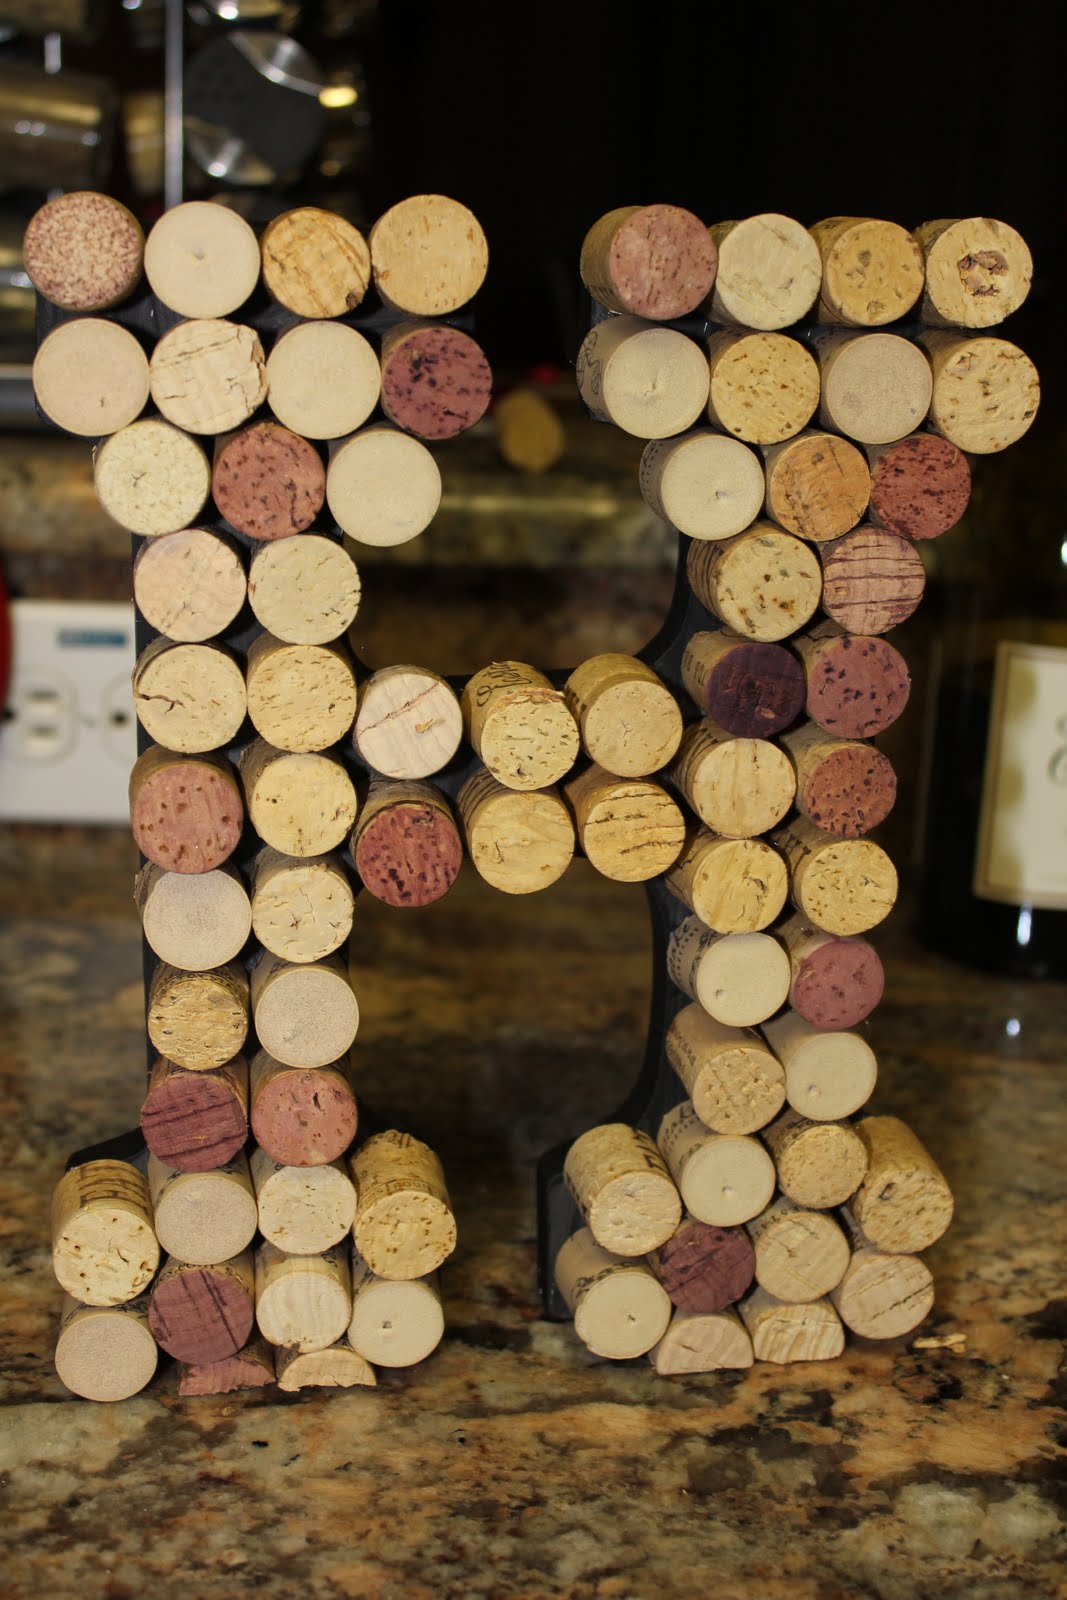 How to Make a DIY Wine Cork Letter